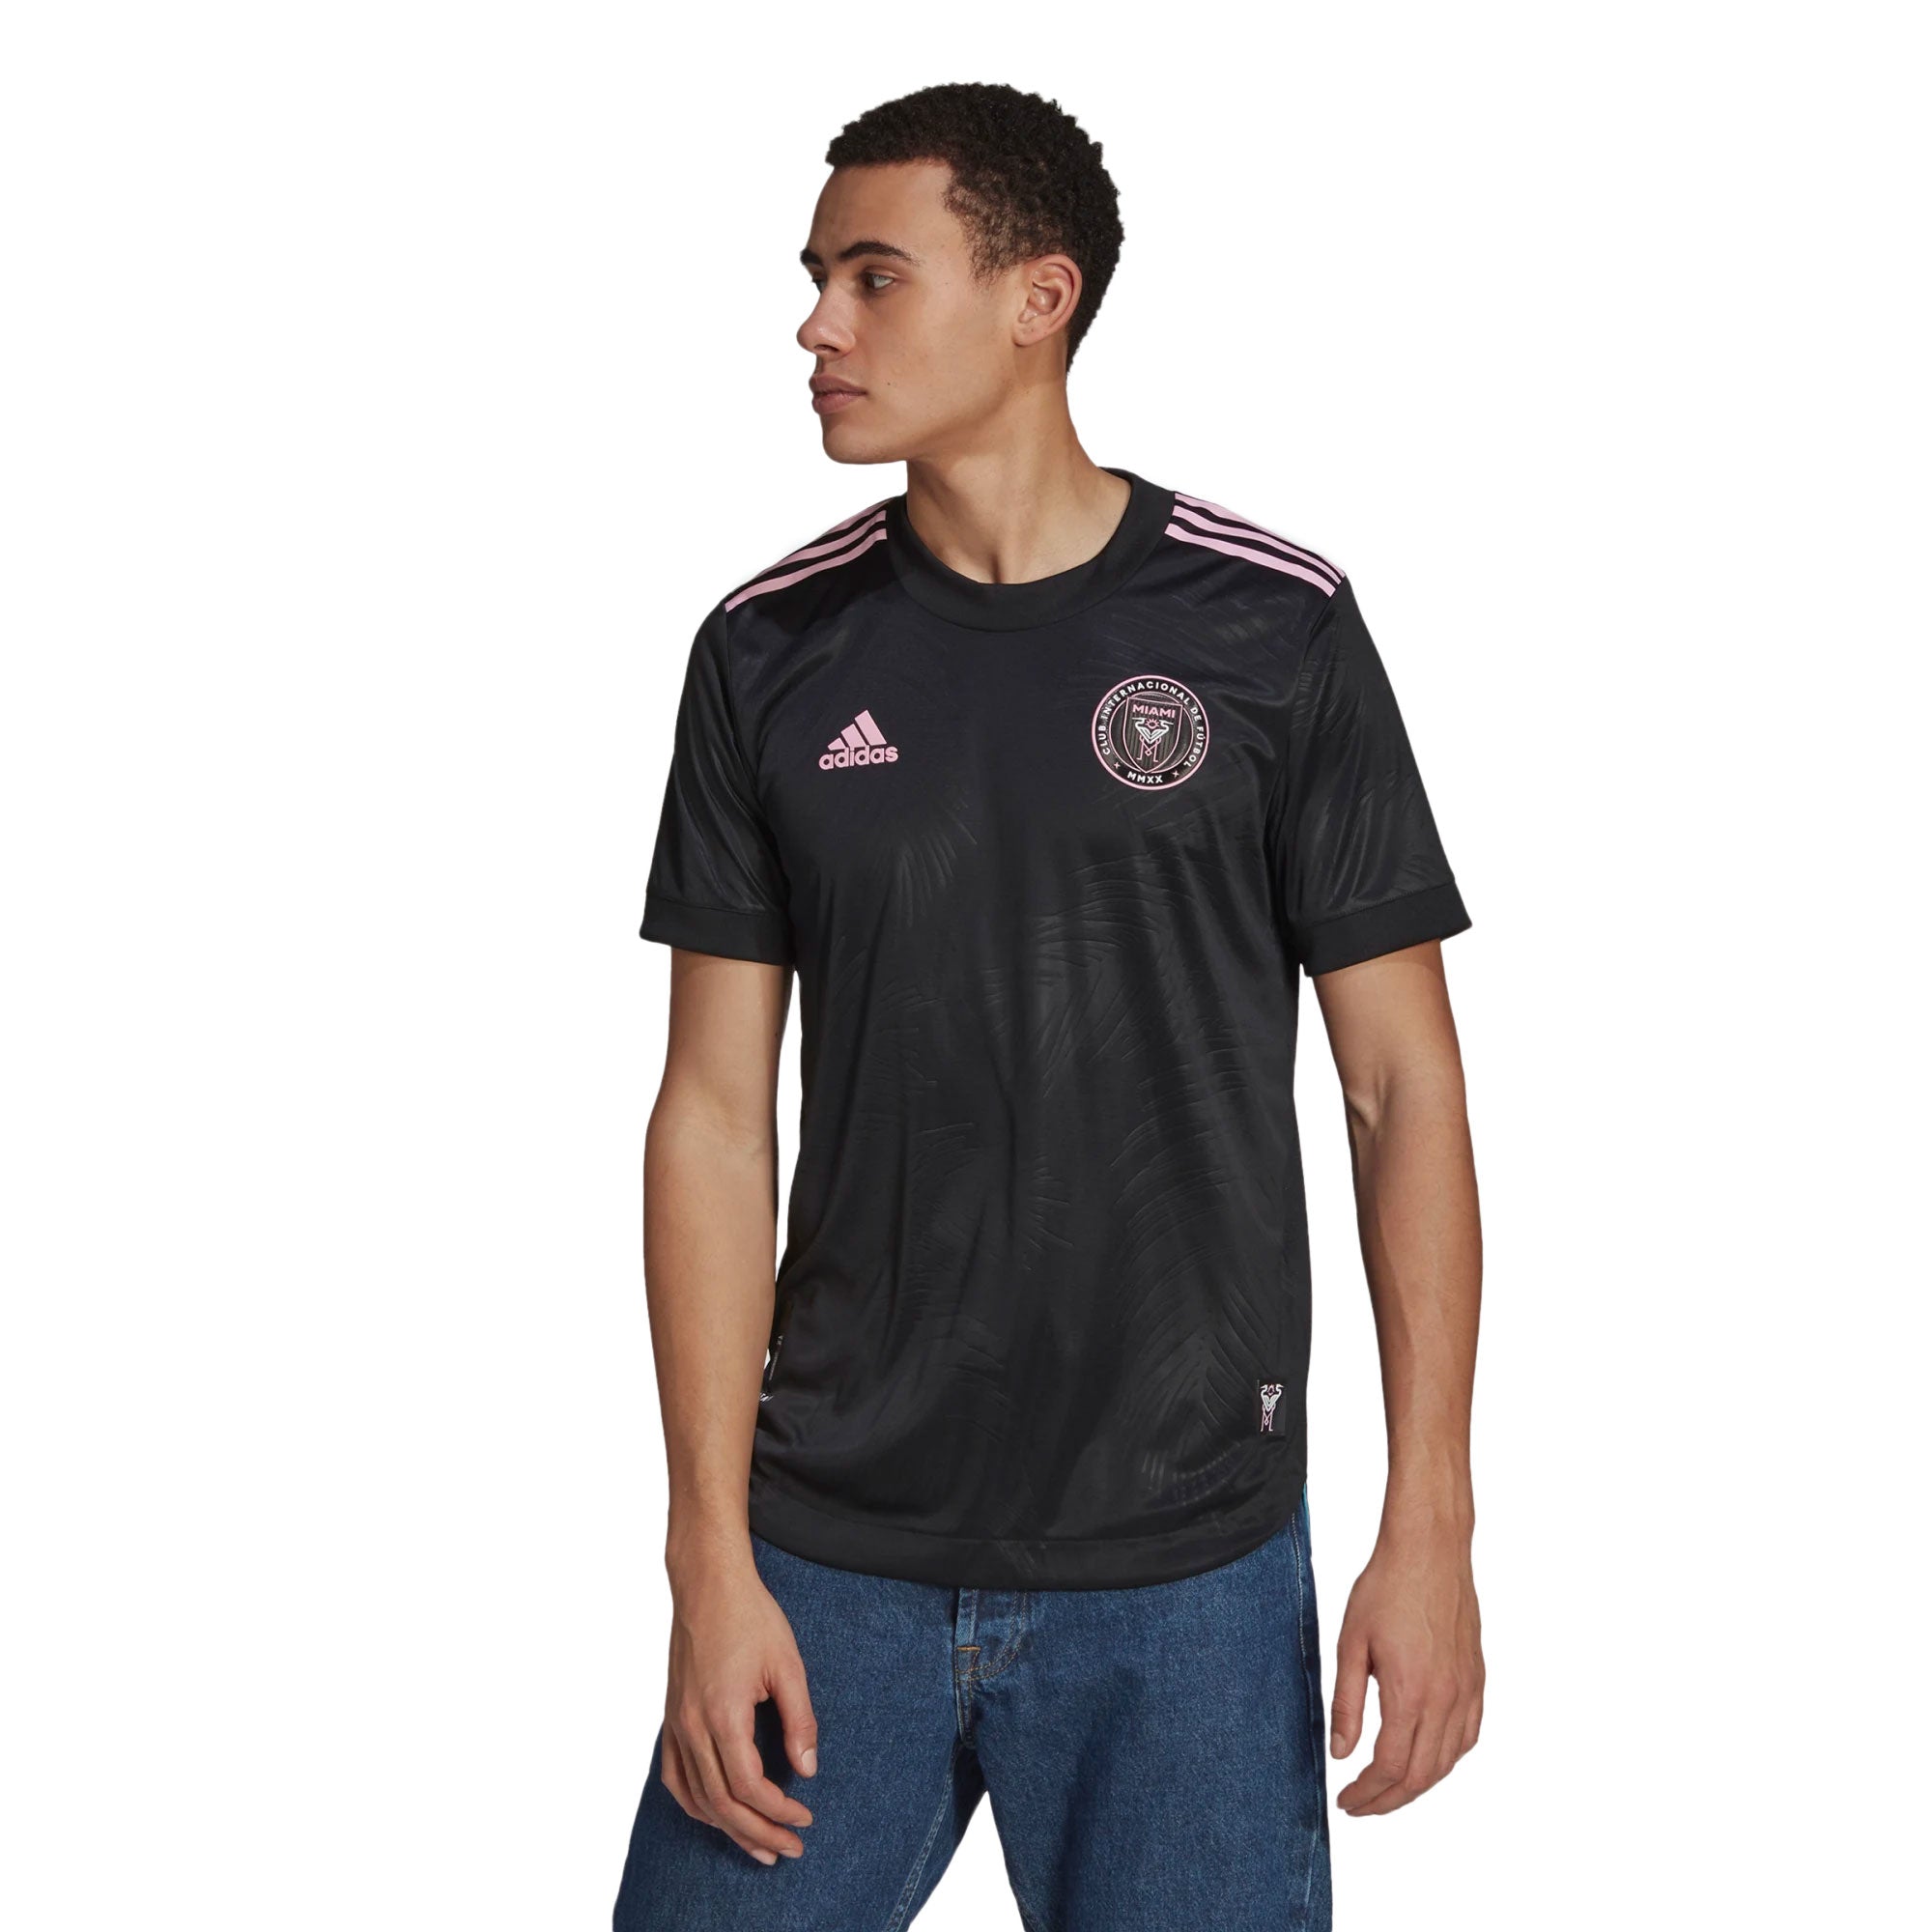 Inter Miami CF 2021 Authentic Away Jersey by Adidas - S